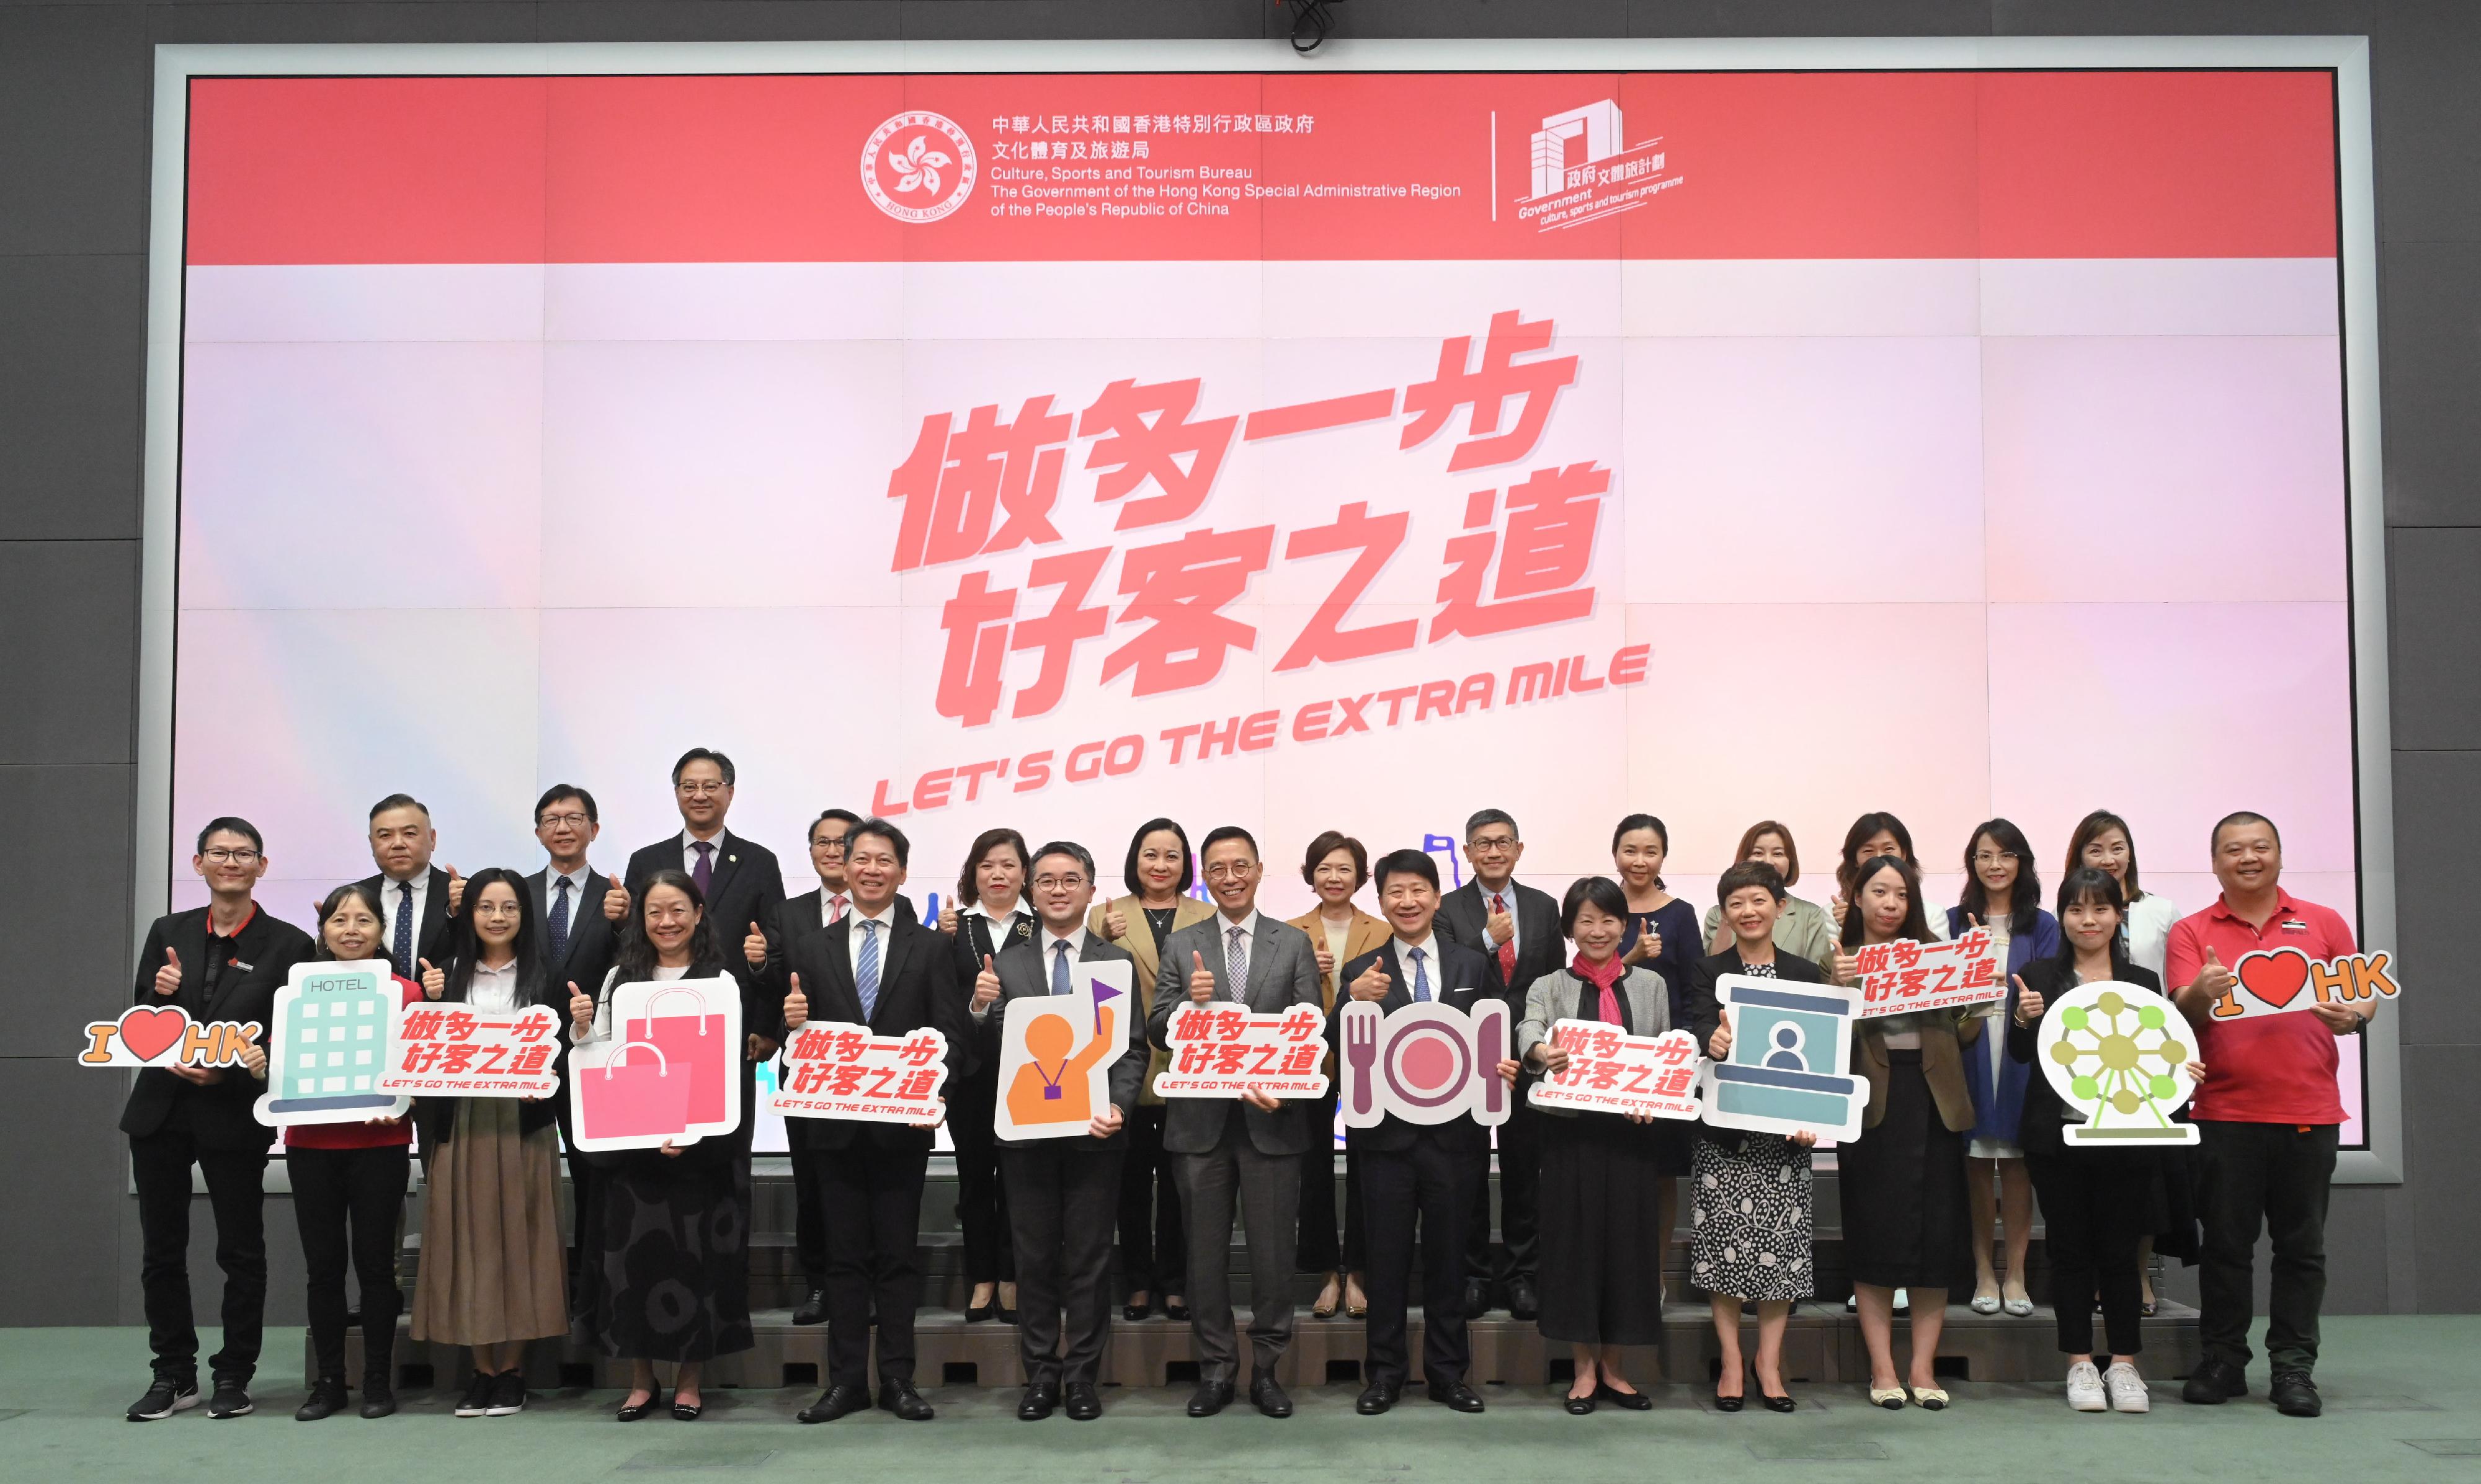 The Secretary for Culture, Sports and Tourism, Mr Kevin Yeung (front row, centre) launched the Hospitality Campaign today (June 3) with representatives from the Education Bureau, the Home Affairs Department, the Information Services Department, the Radio Television Hong Kong as well as the Hong Kong Tourism Board, the tourism and related sectors, the education sector and the districts.